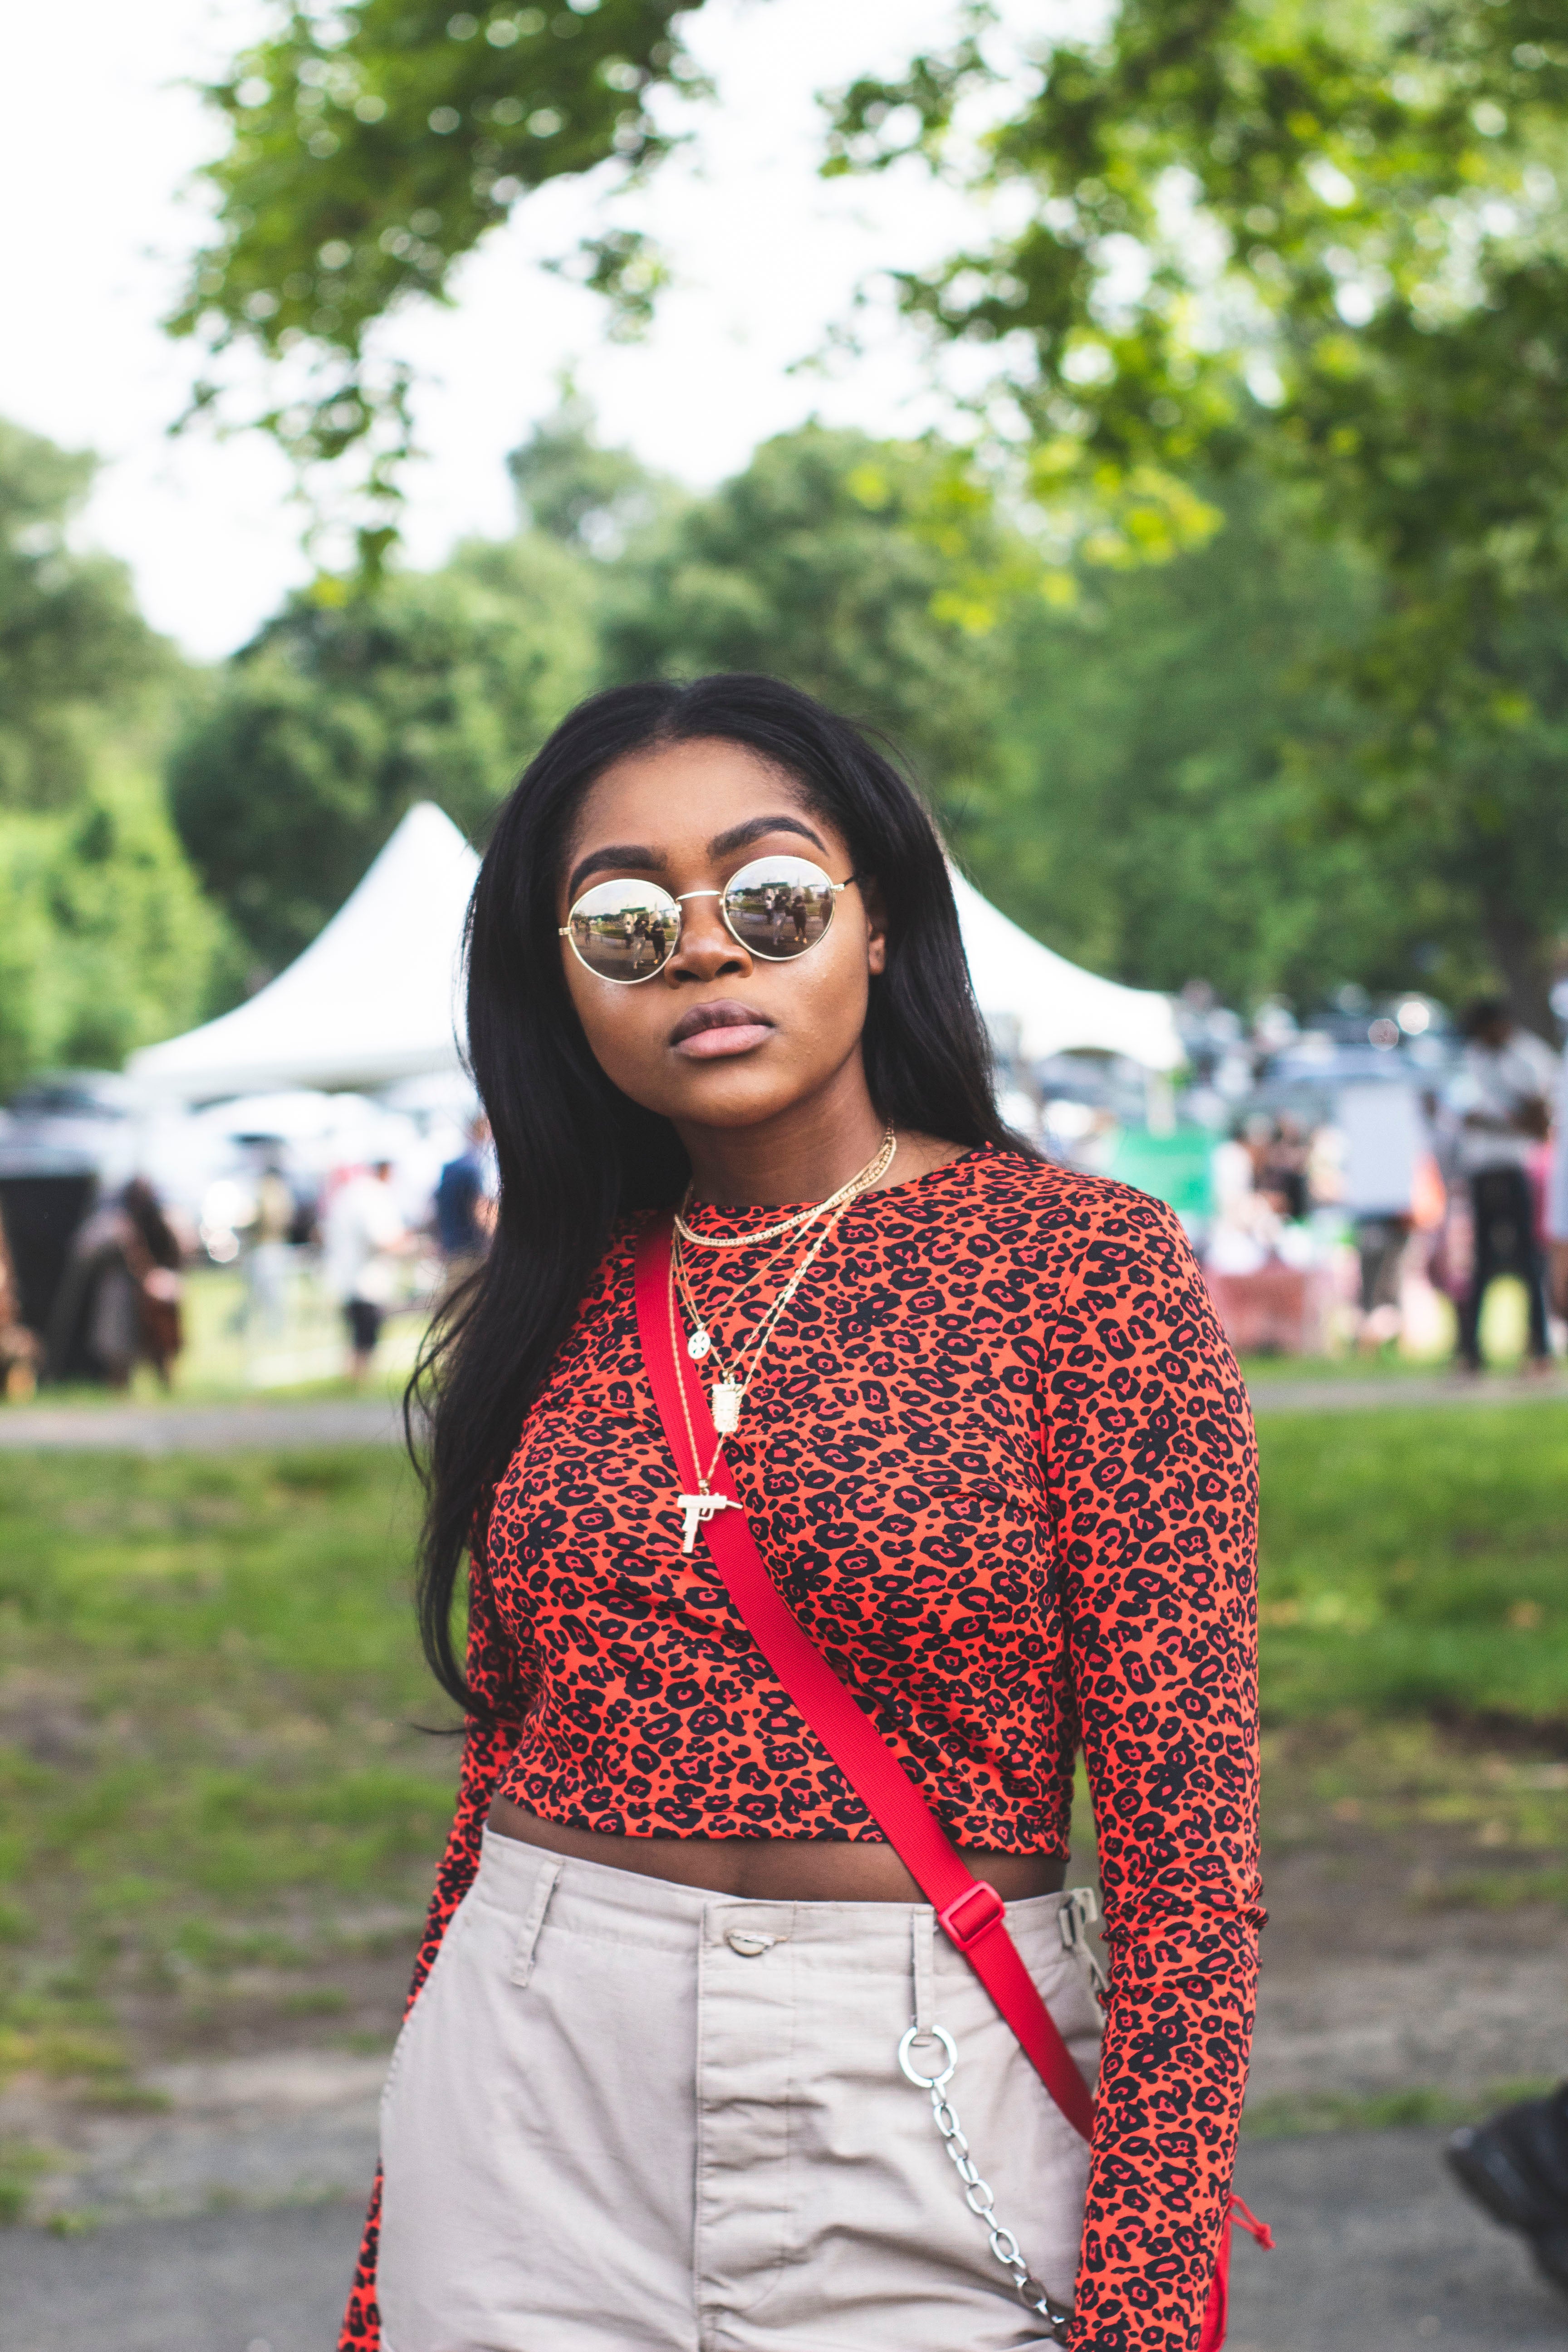 Beauty Was Center Stage At The Roots Picnic 2019